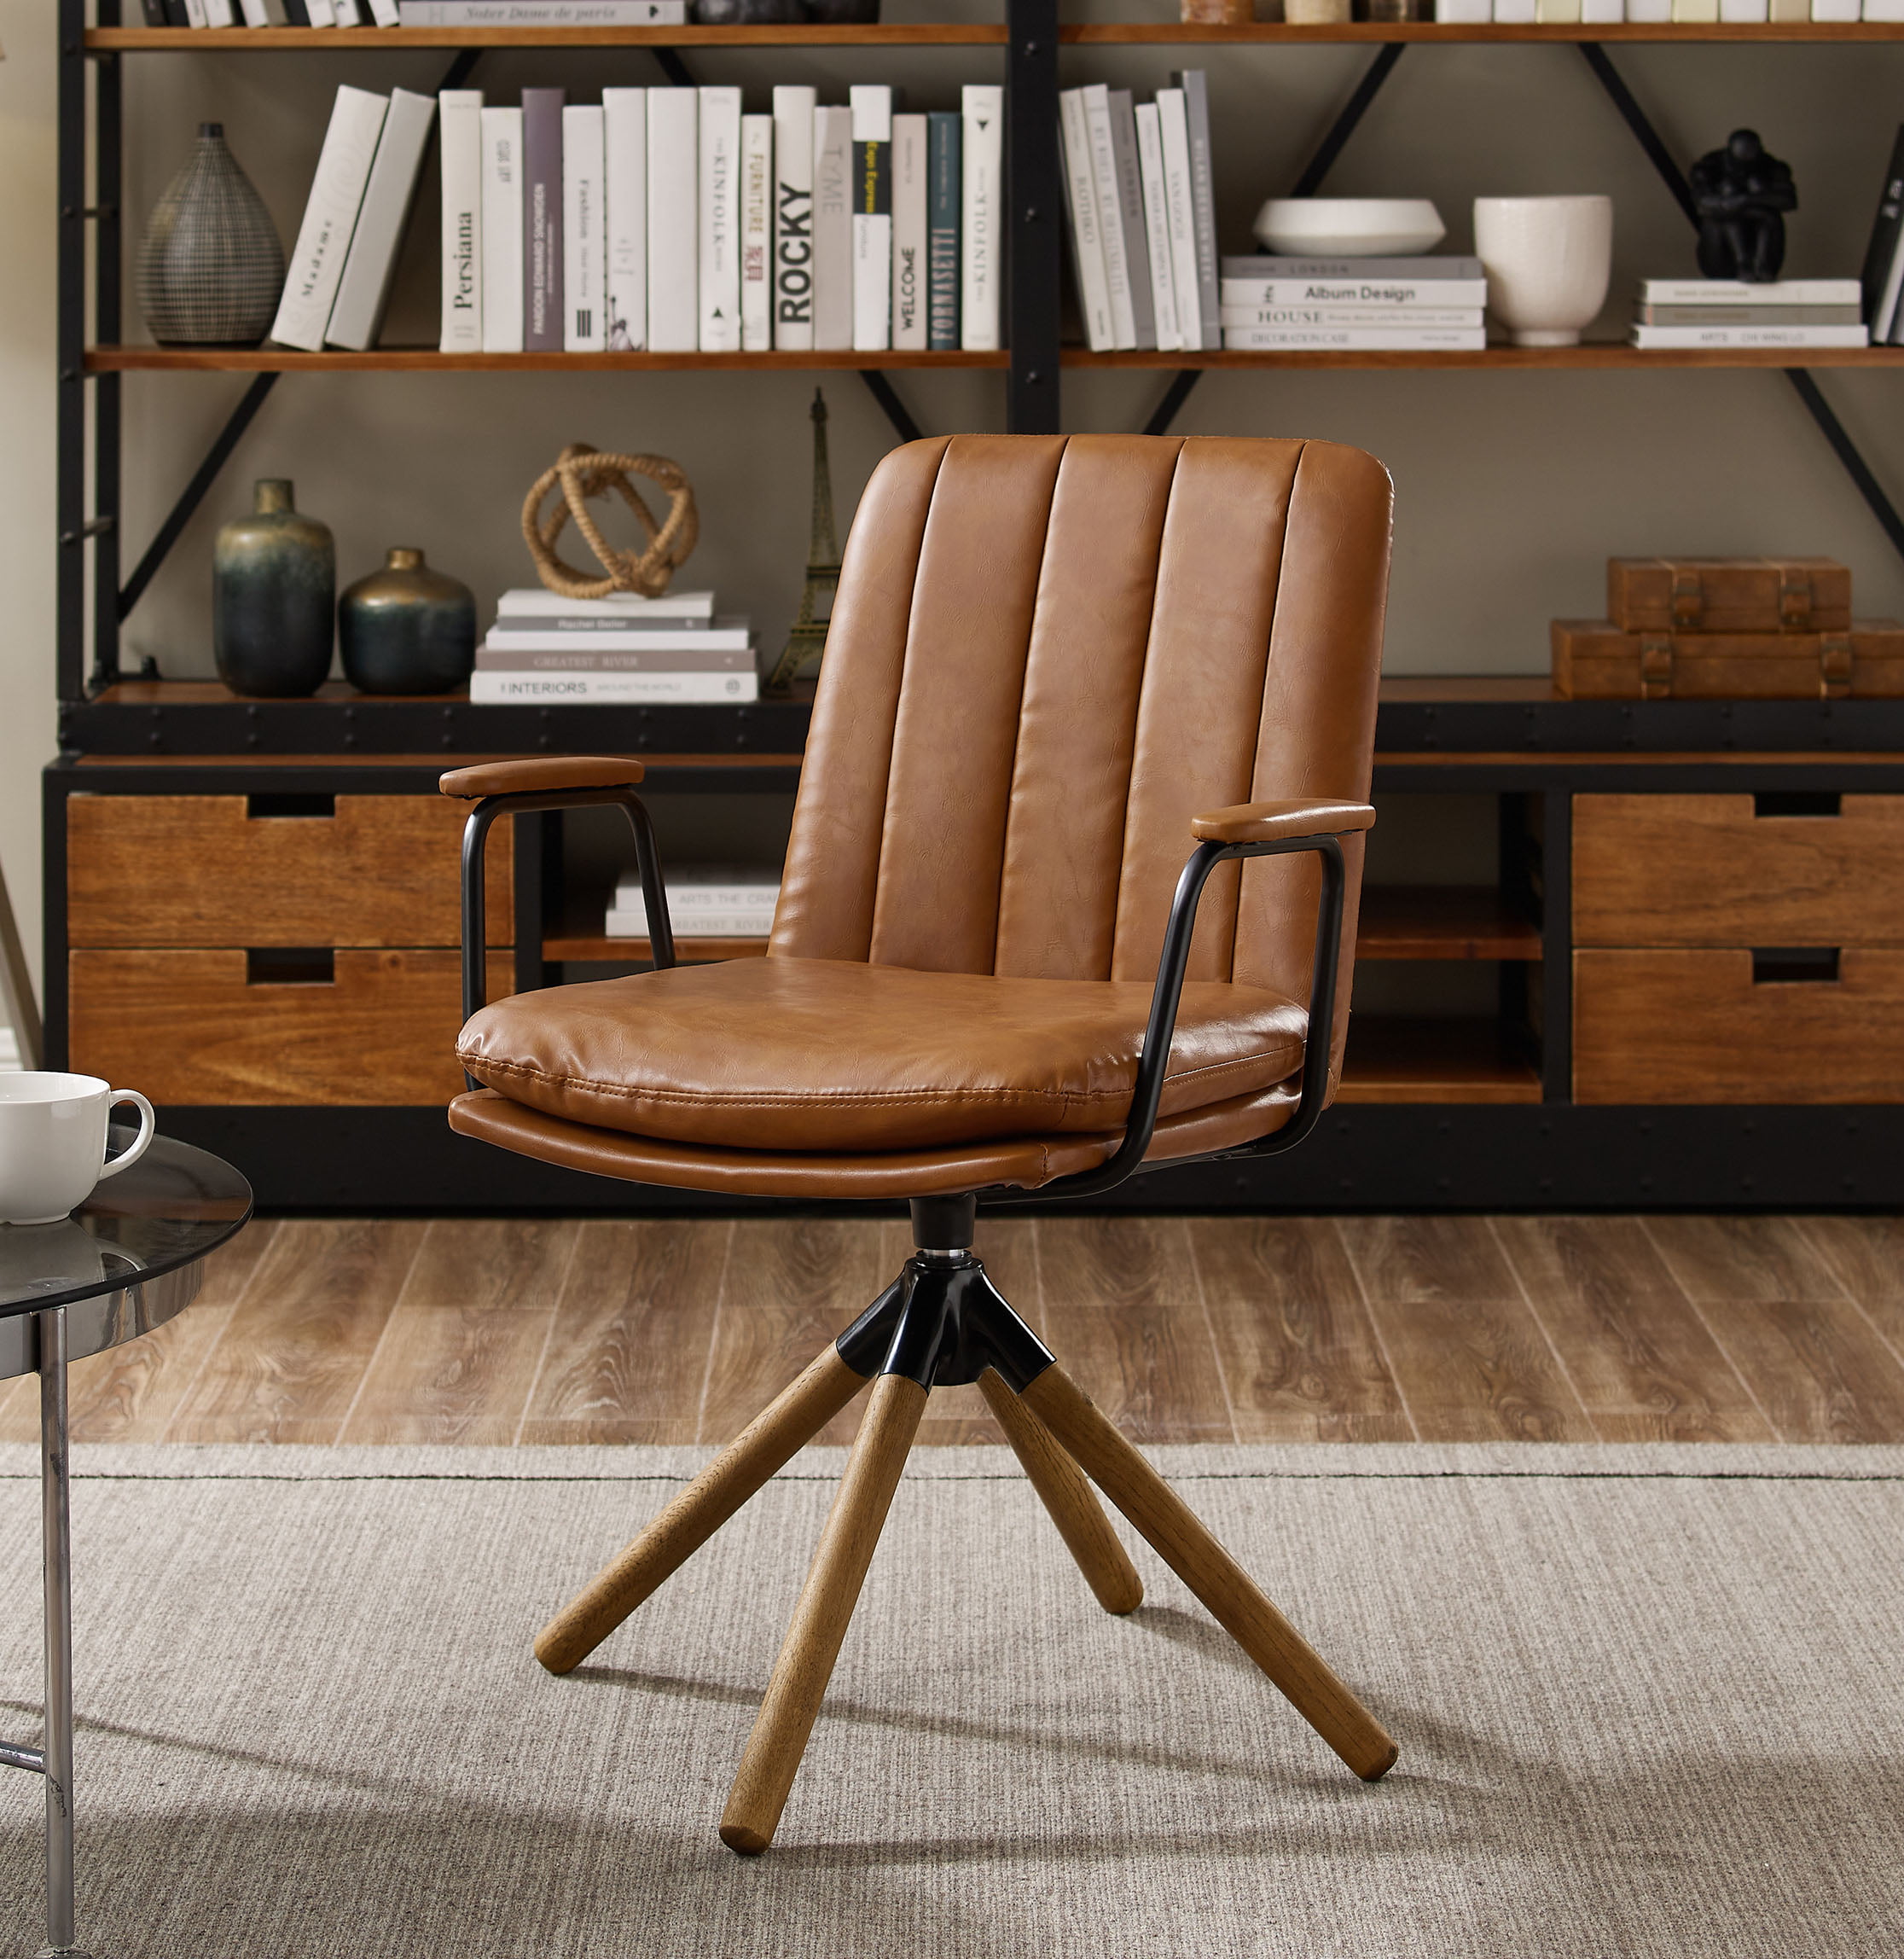 Art Leon Mid Century Accent Chair No Wheels, Faux Leather Swivel Desk Chair,  Upholstered with Oak Wood Legs, Yellow Brown 